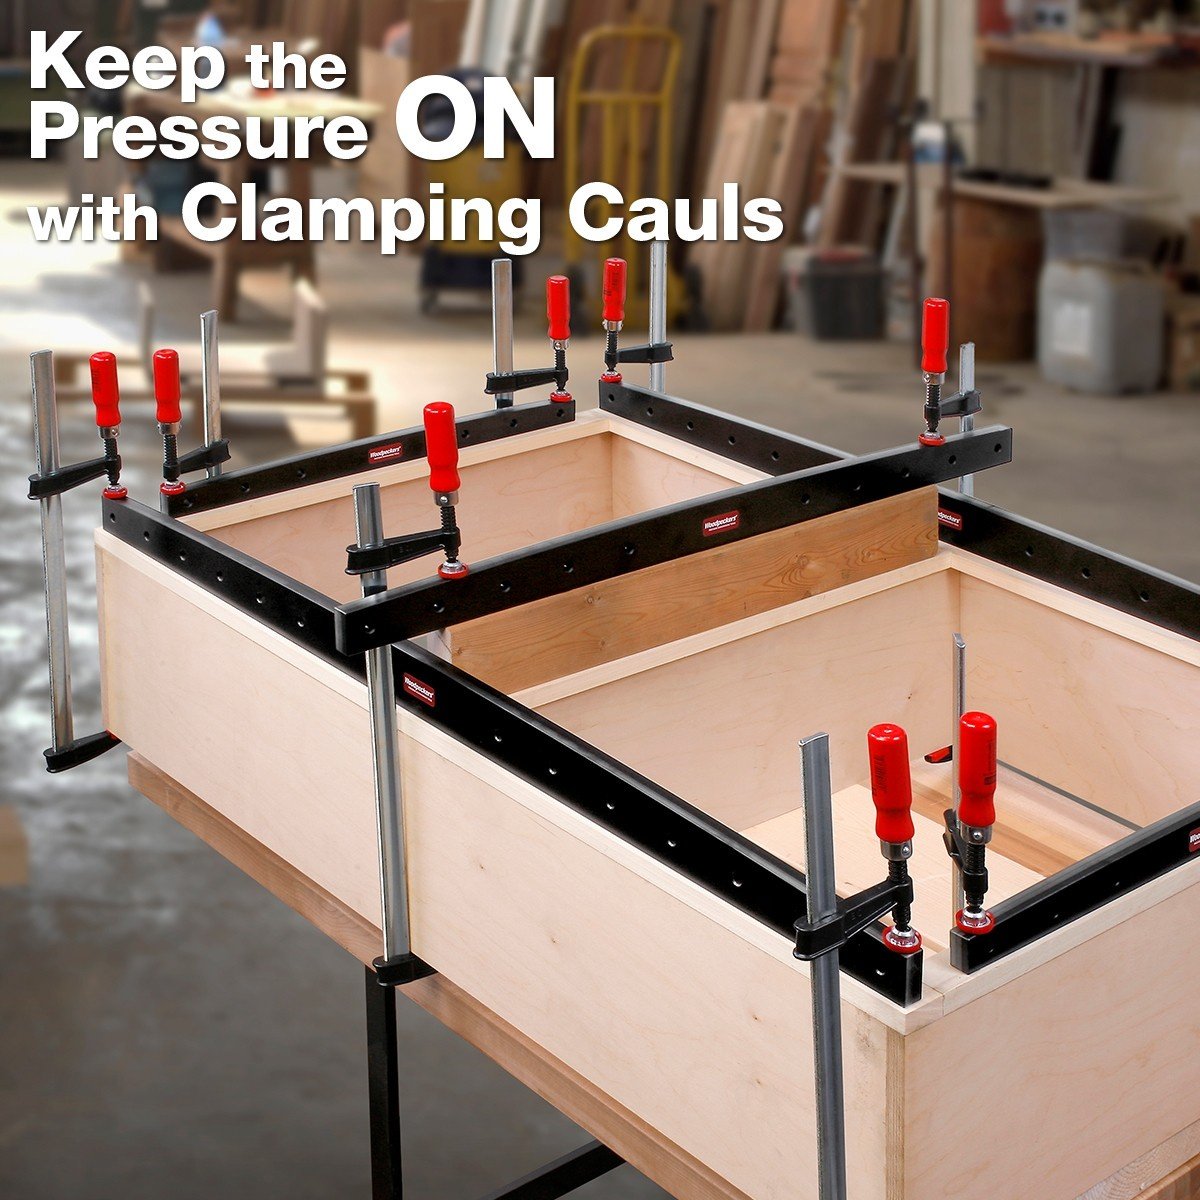 Clamping